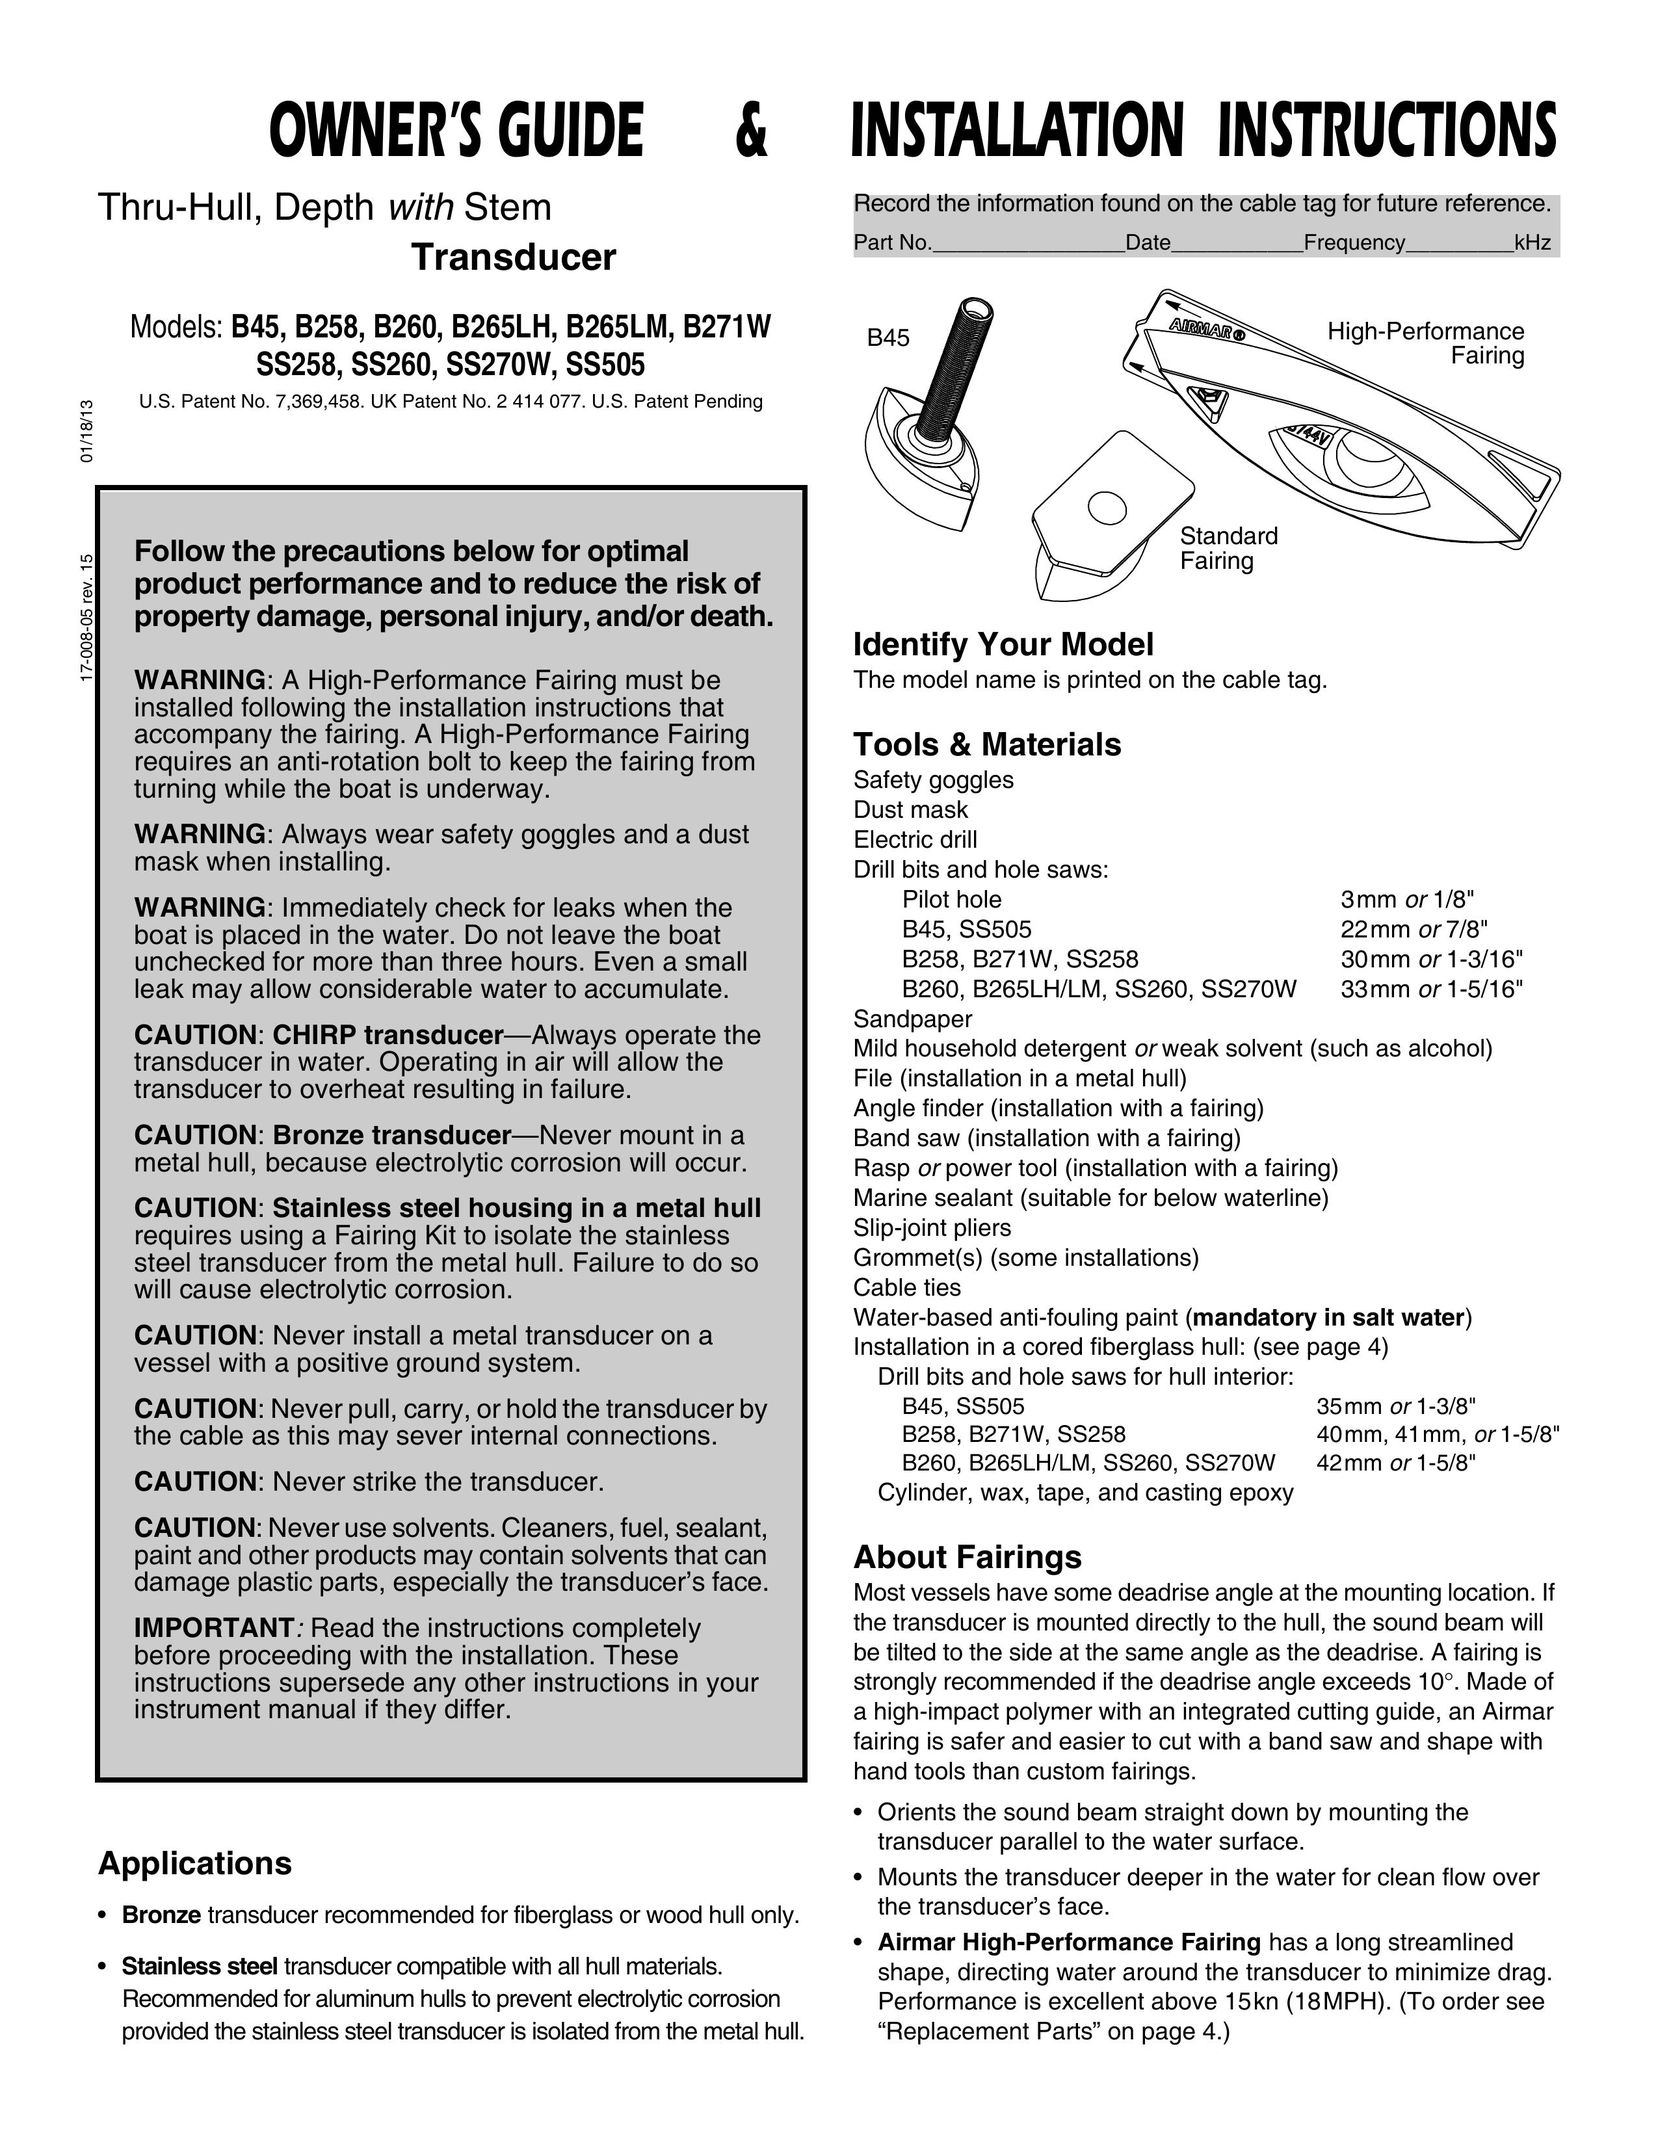 New Transducers B271W SS258 Network Router User Manual